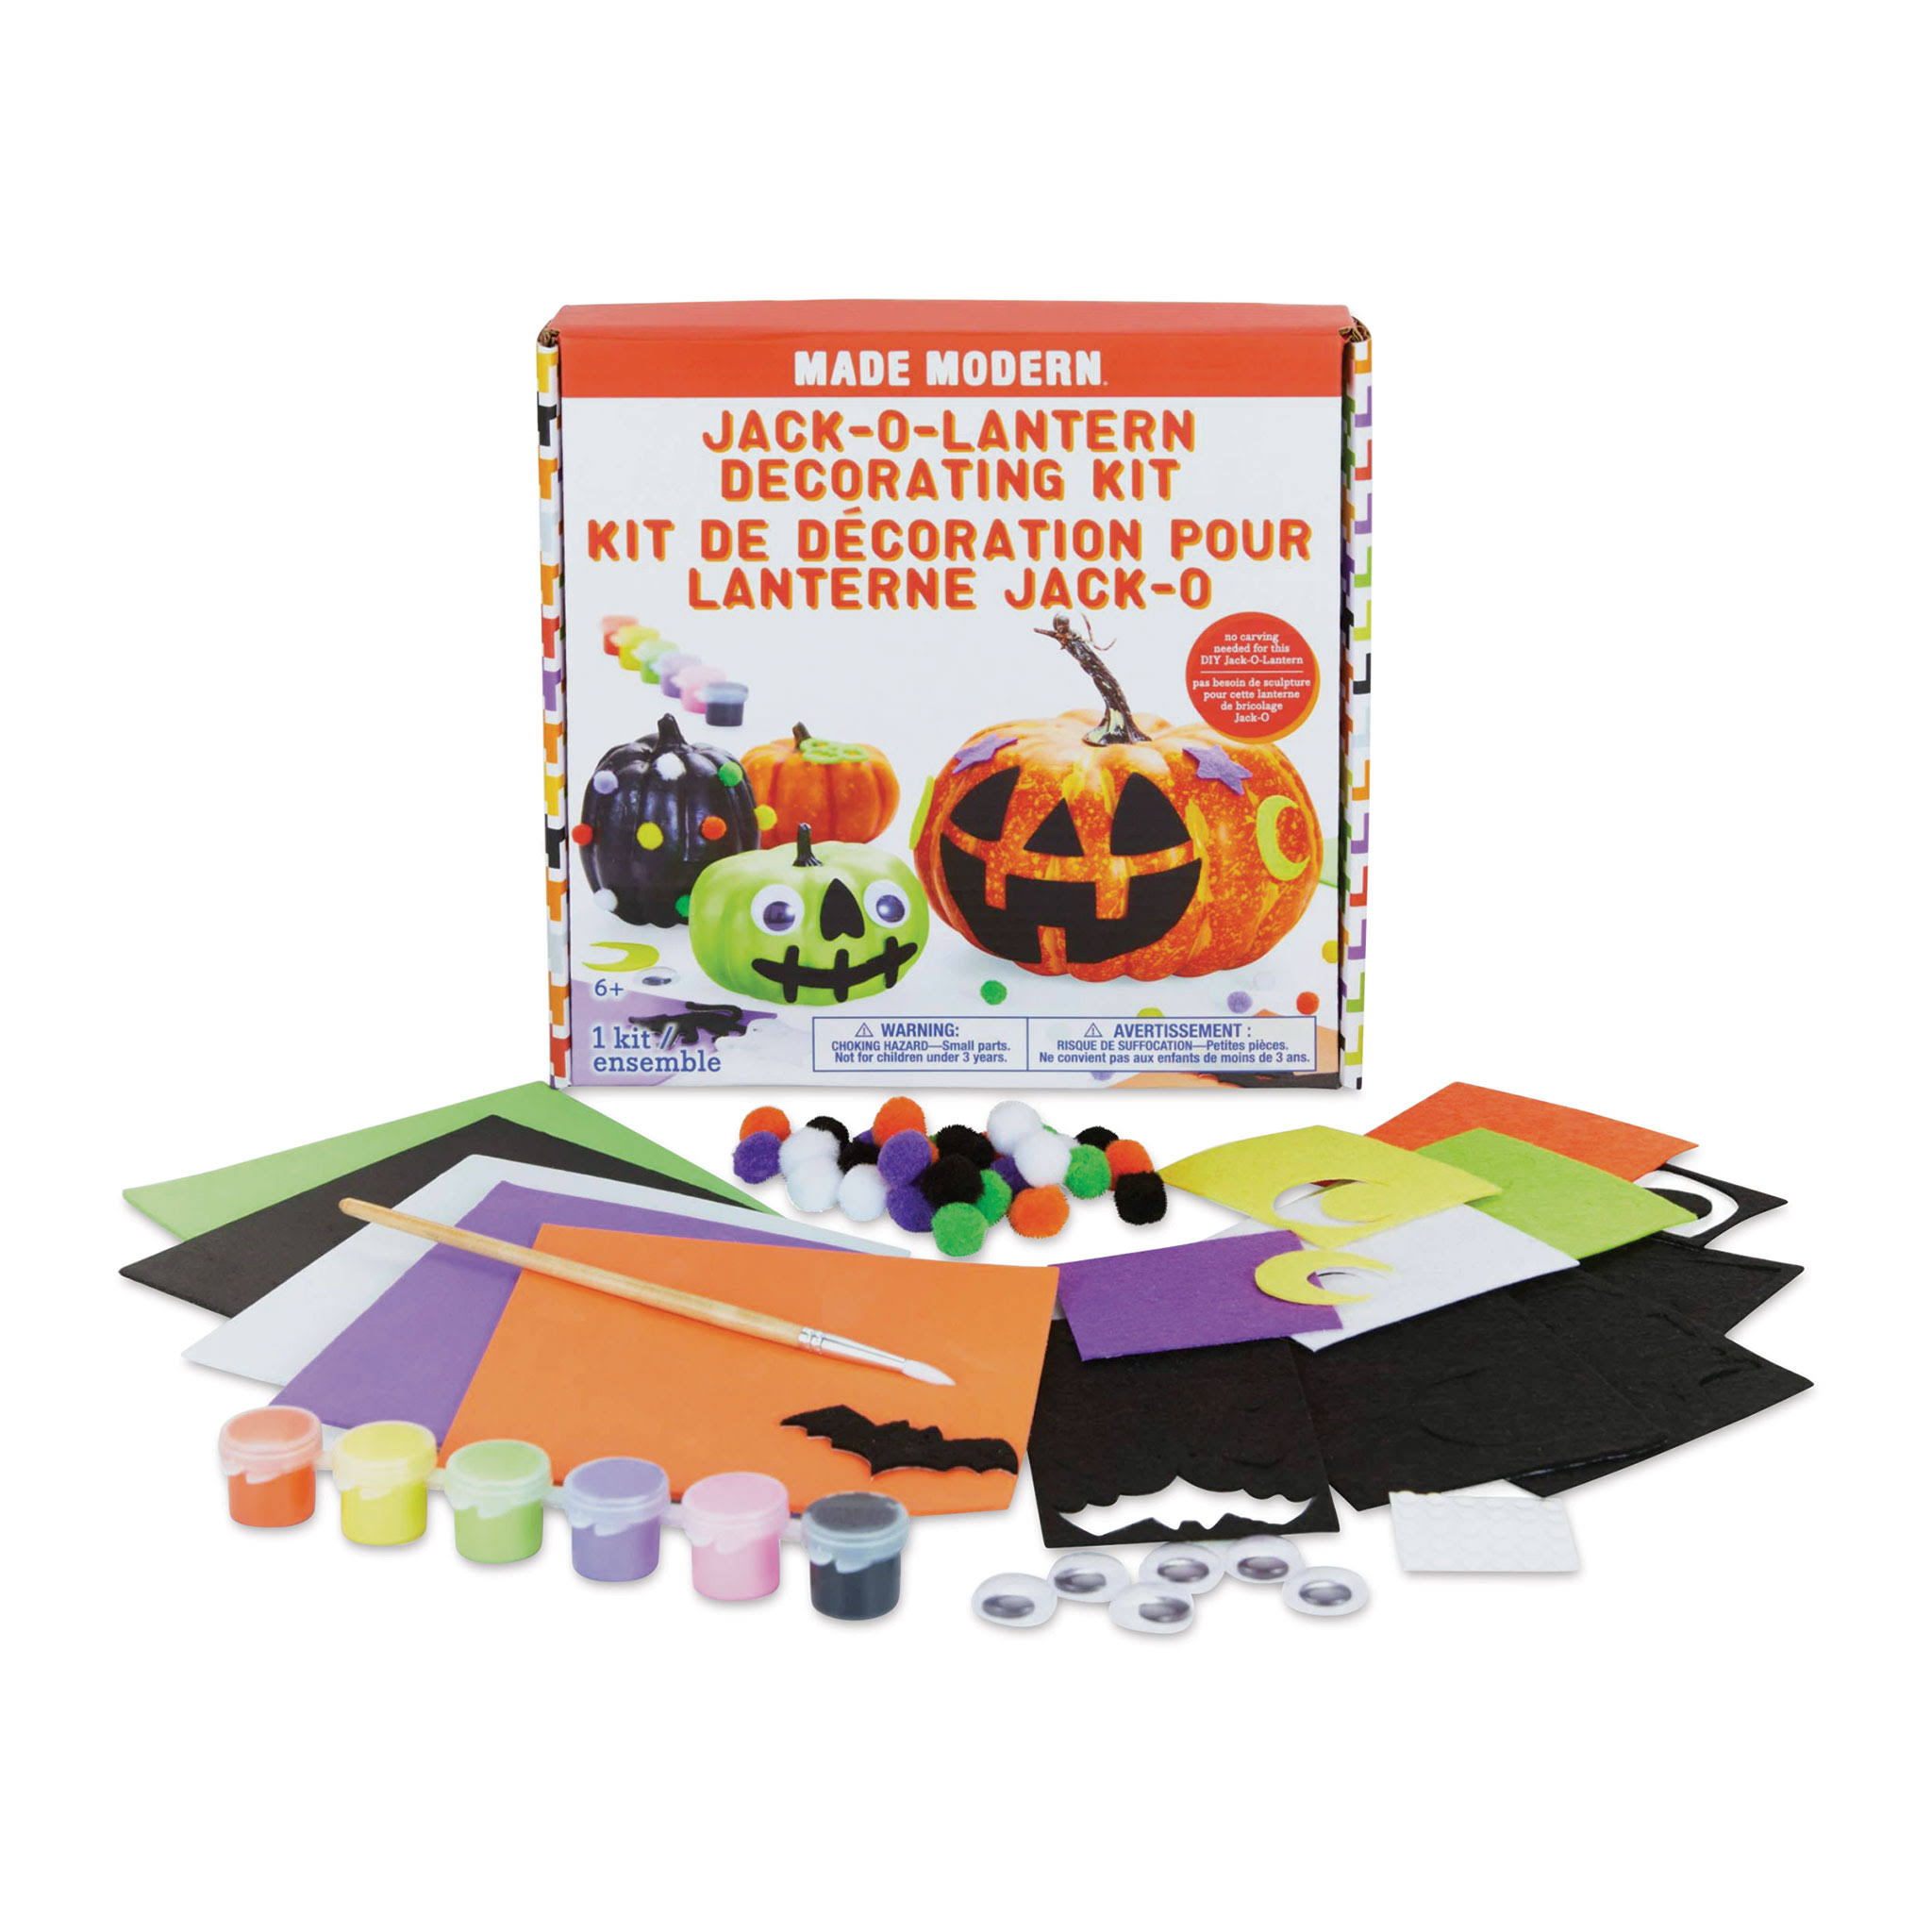 Kid Made Modern Jack-O-Lantern Decorating Kit - Halloween Arts and Crafts for Kids Ages 6 7 8 9